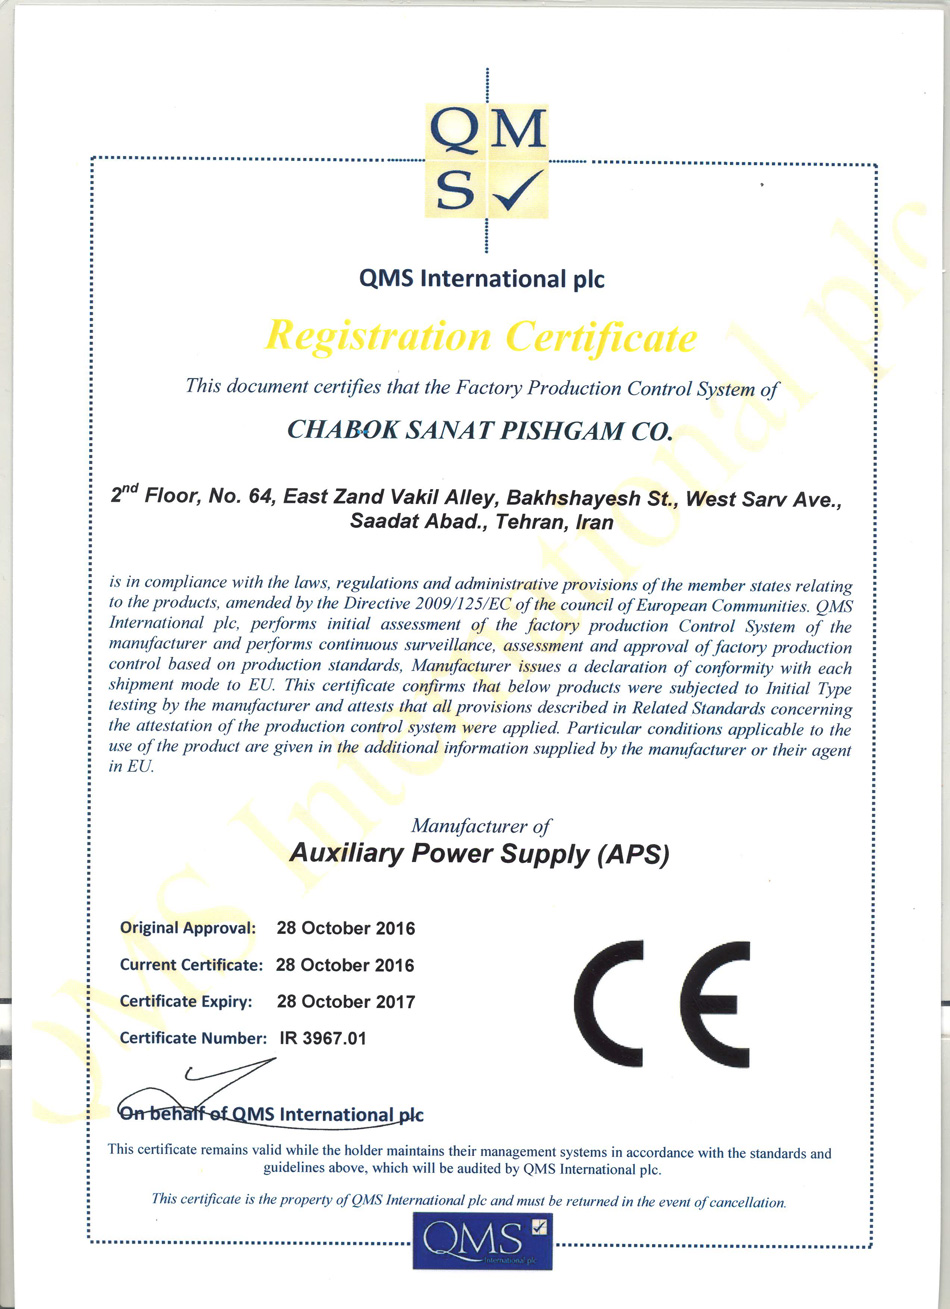 Registration Certificate of Auxiliary Power Supply